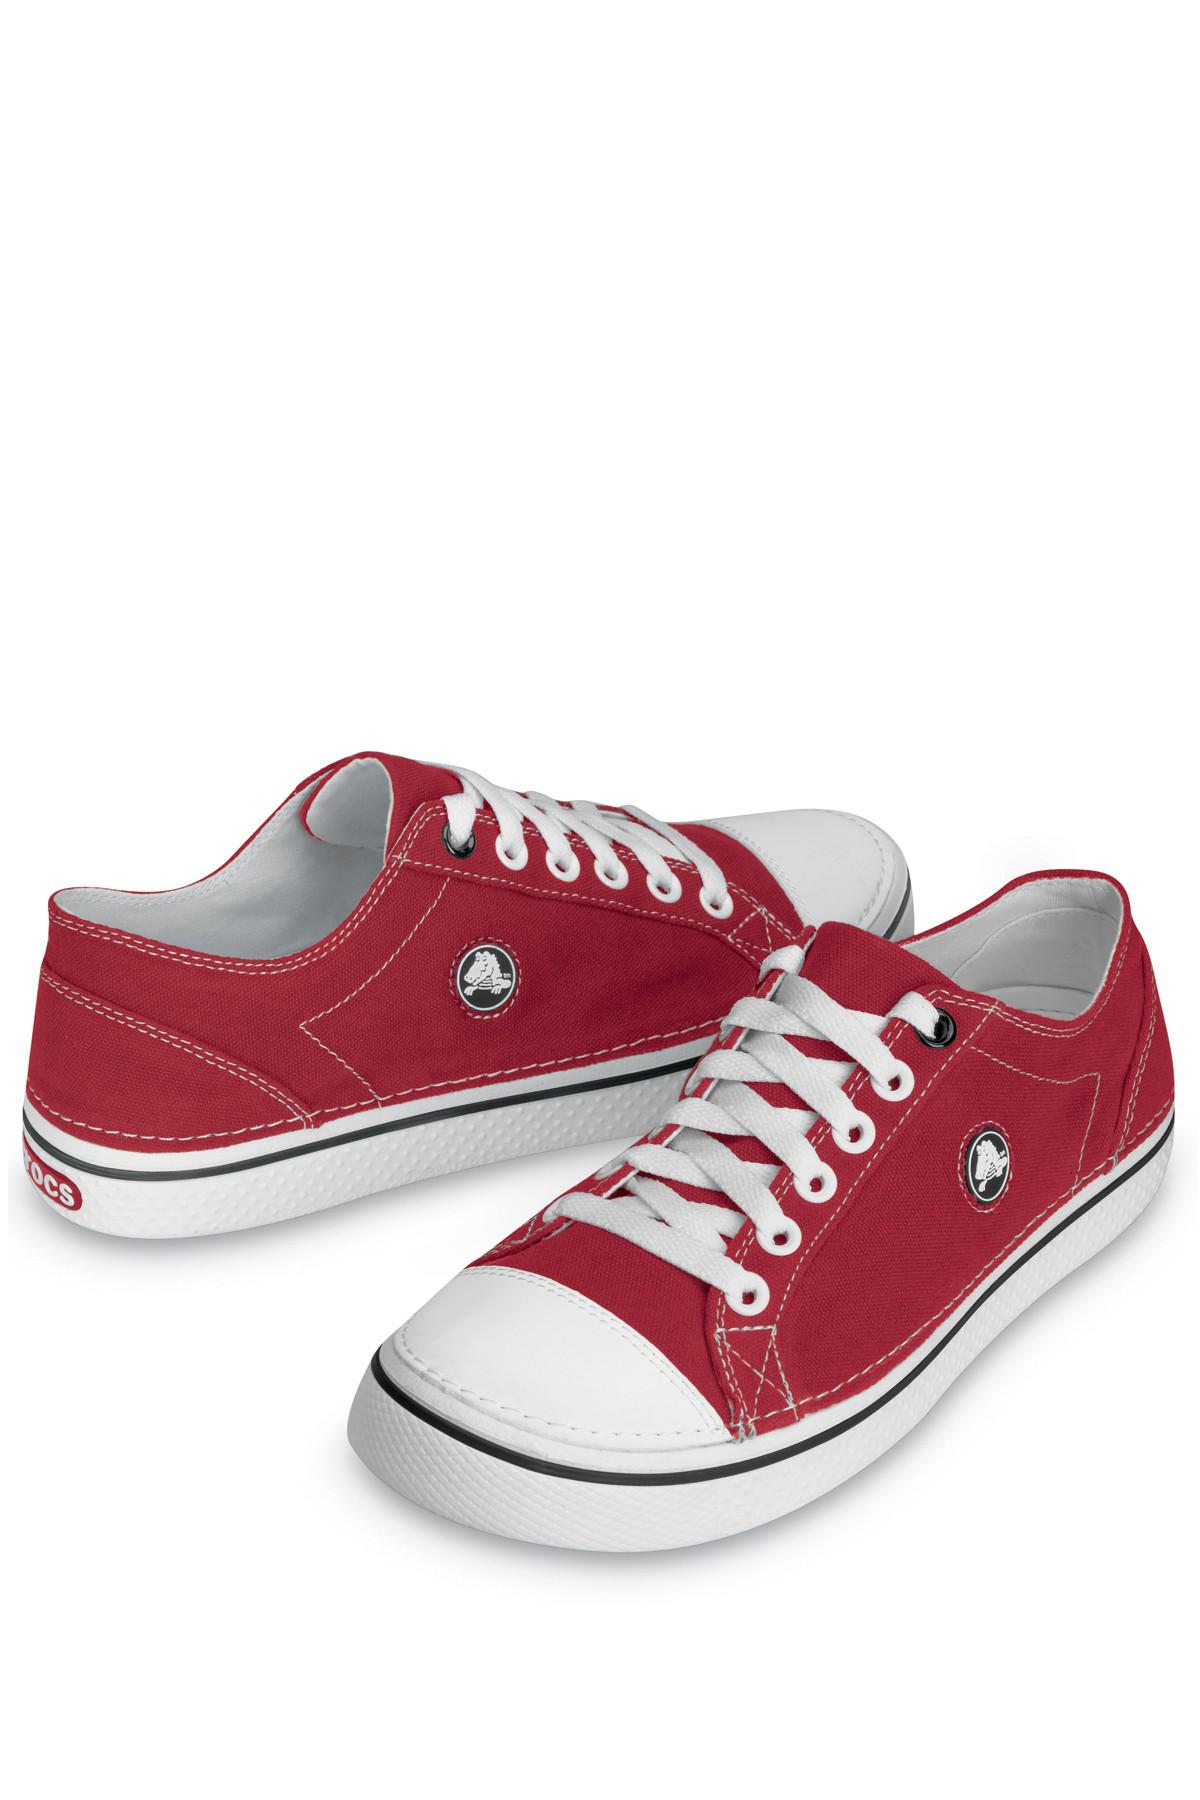 Crocs™ Canvas Hover Lace-up Sneaker in Red for Men - Lyst